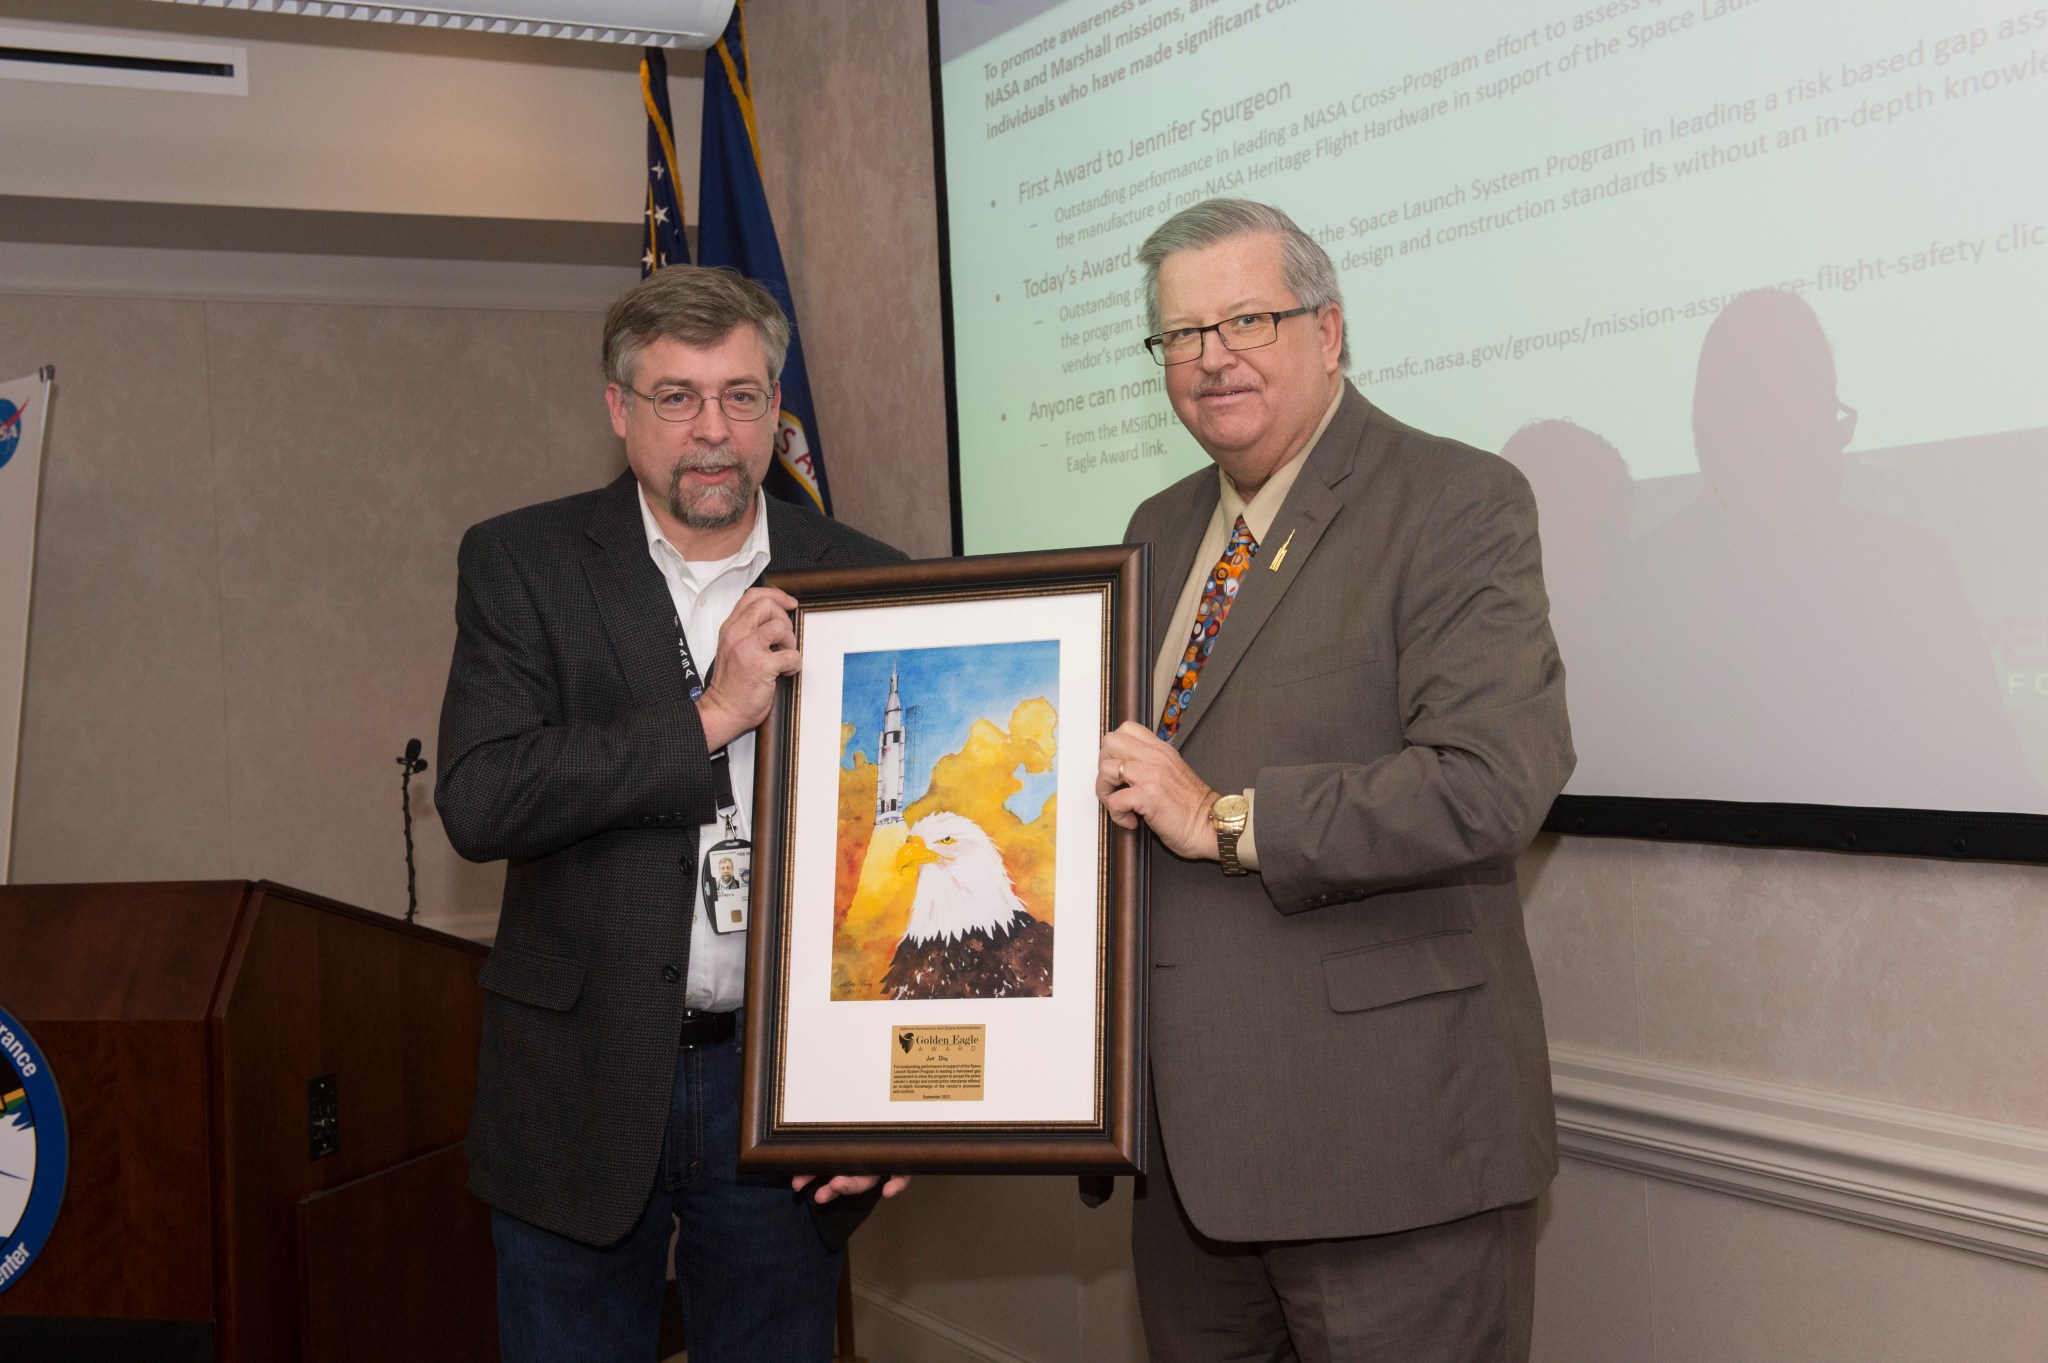 Jeff Dilg, left, is presented the Golden Eagle Award by Steven Pearson at a Feb. 24 Shared Experiences forum.